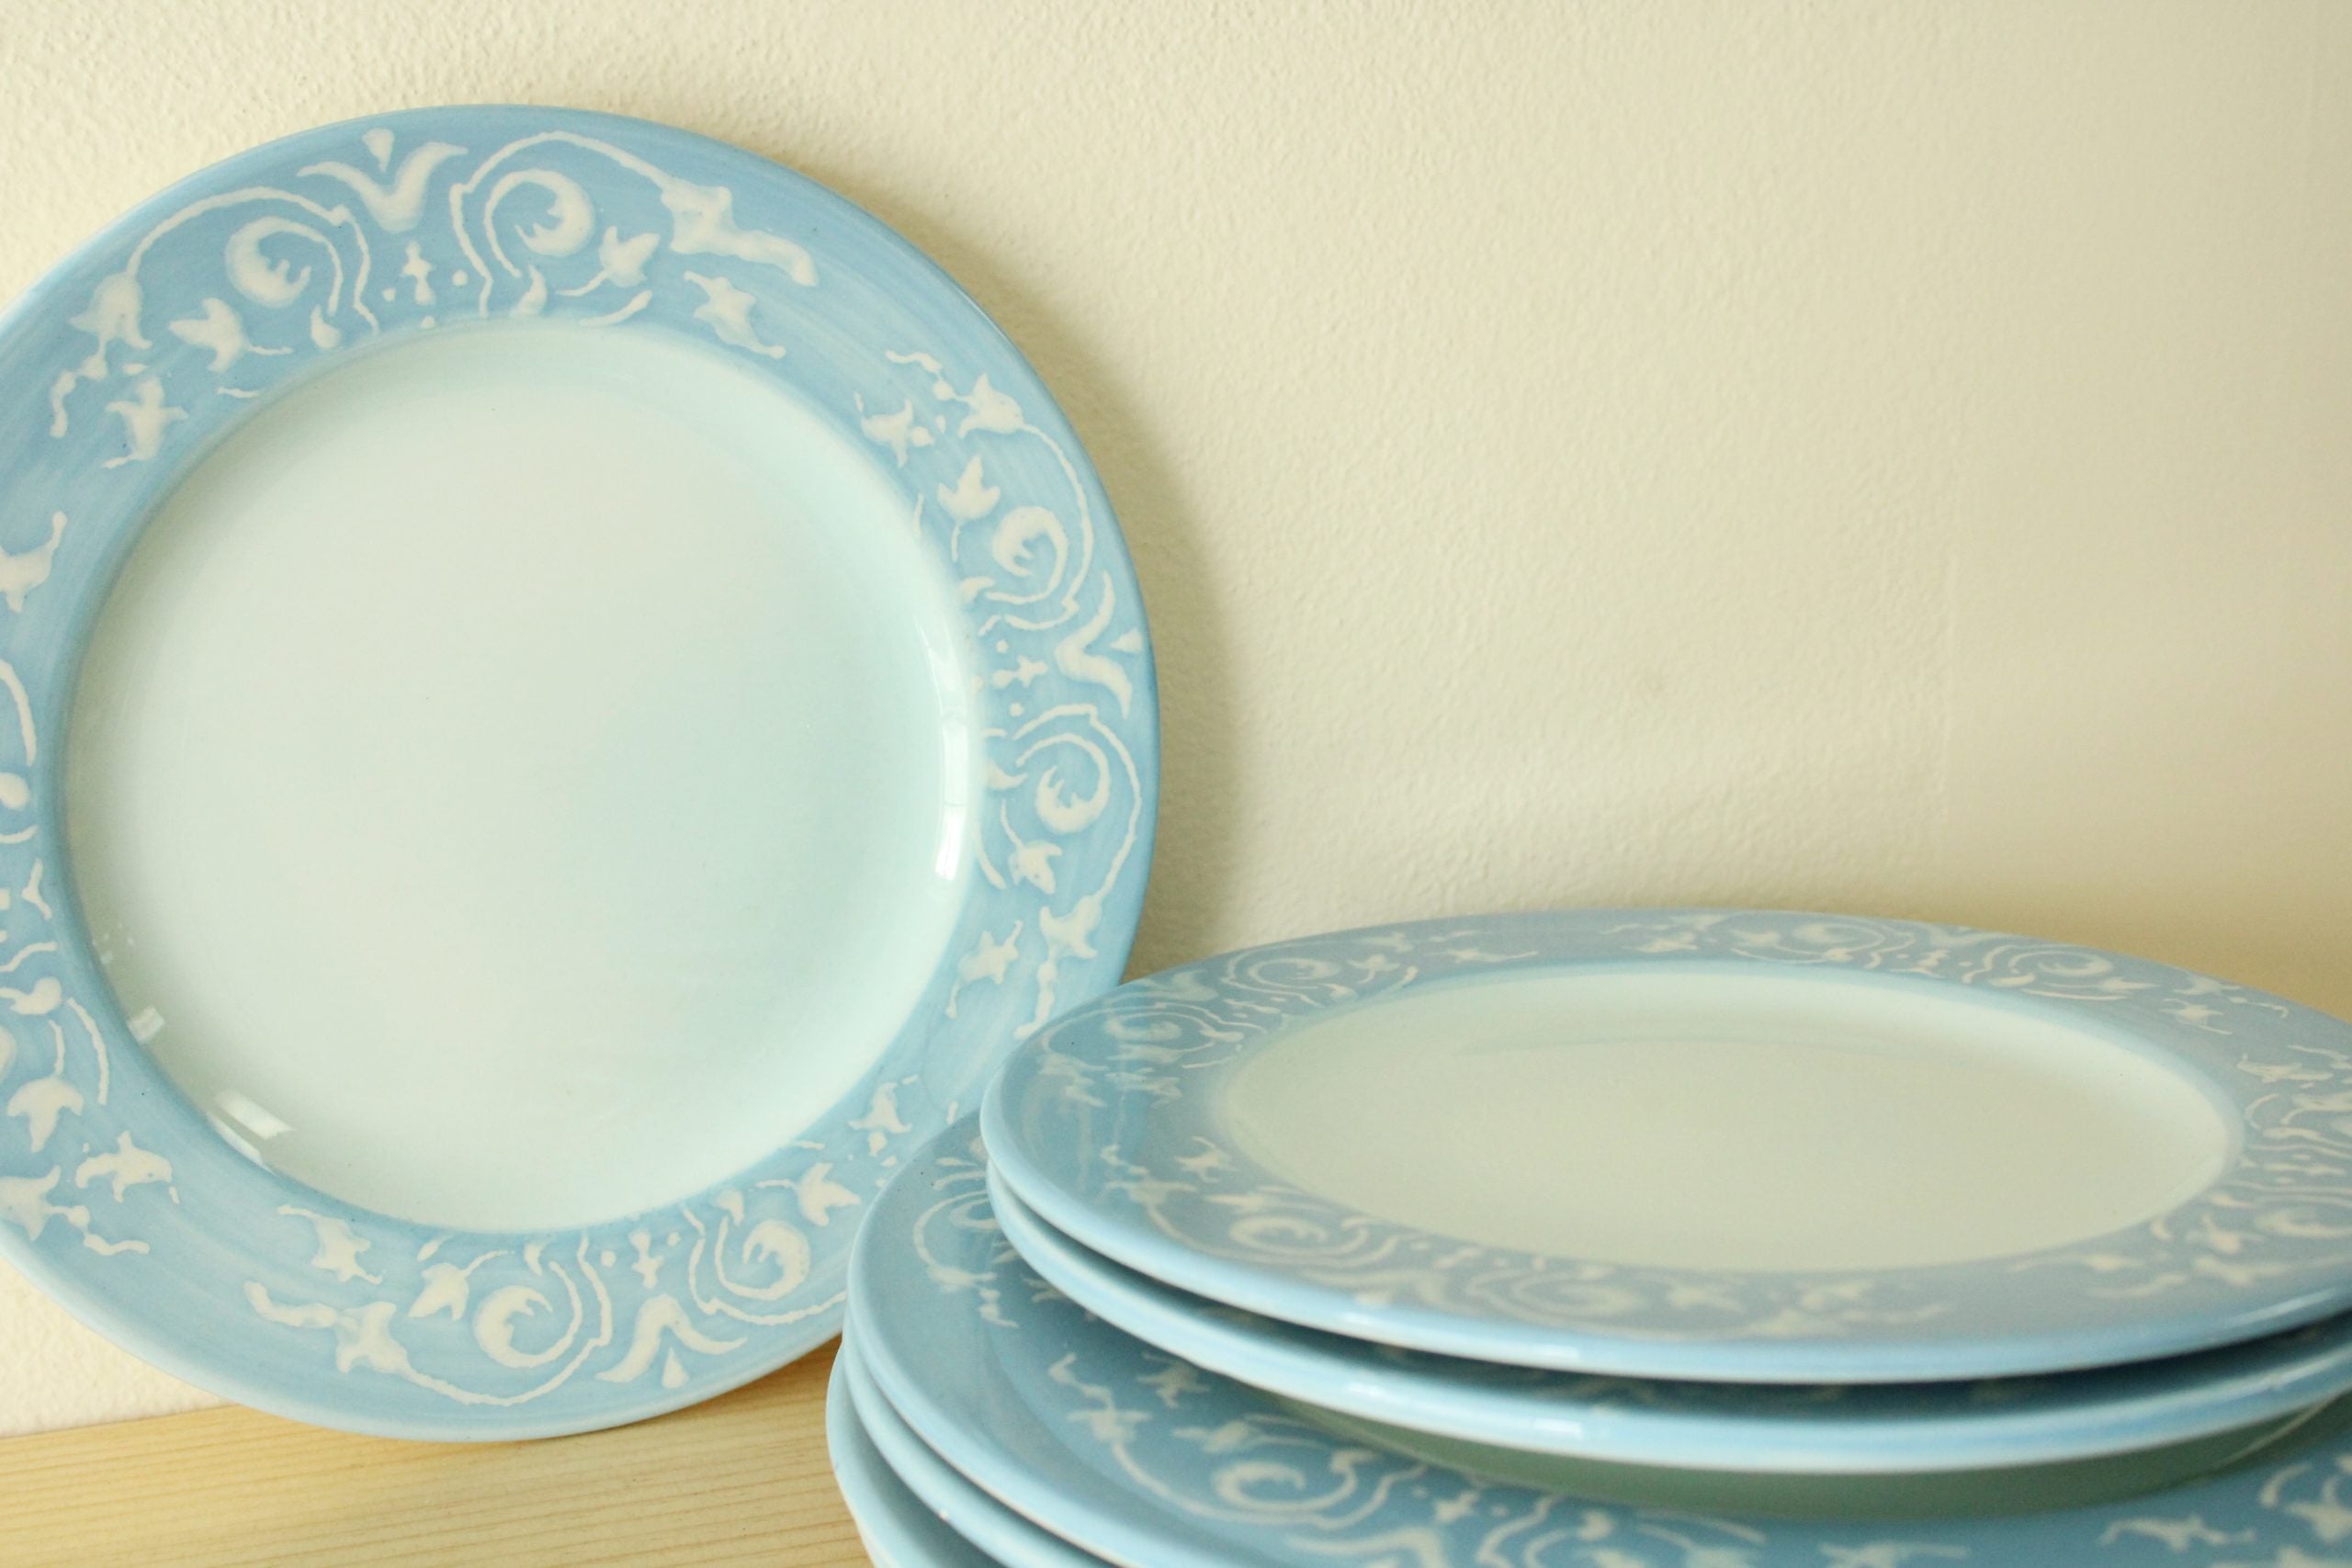 Bizzirri Made In Italy Blue Dinner Plates | 10.5" | Set Of 4